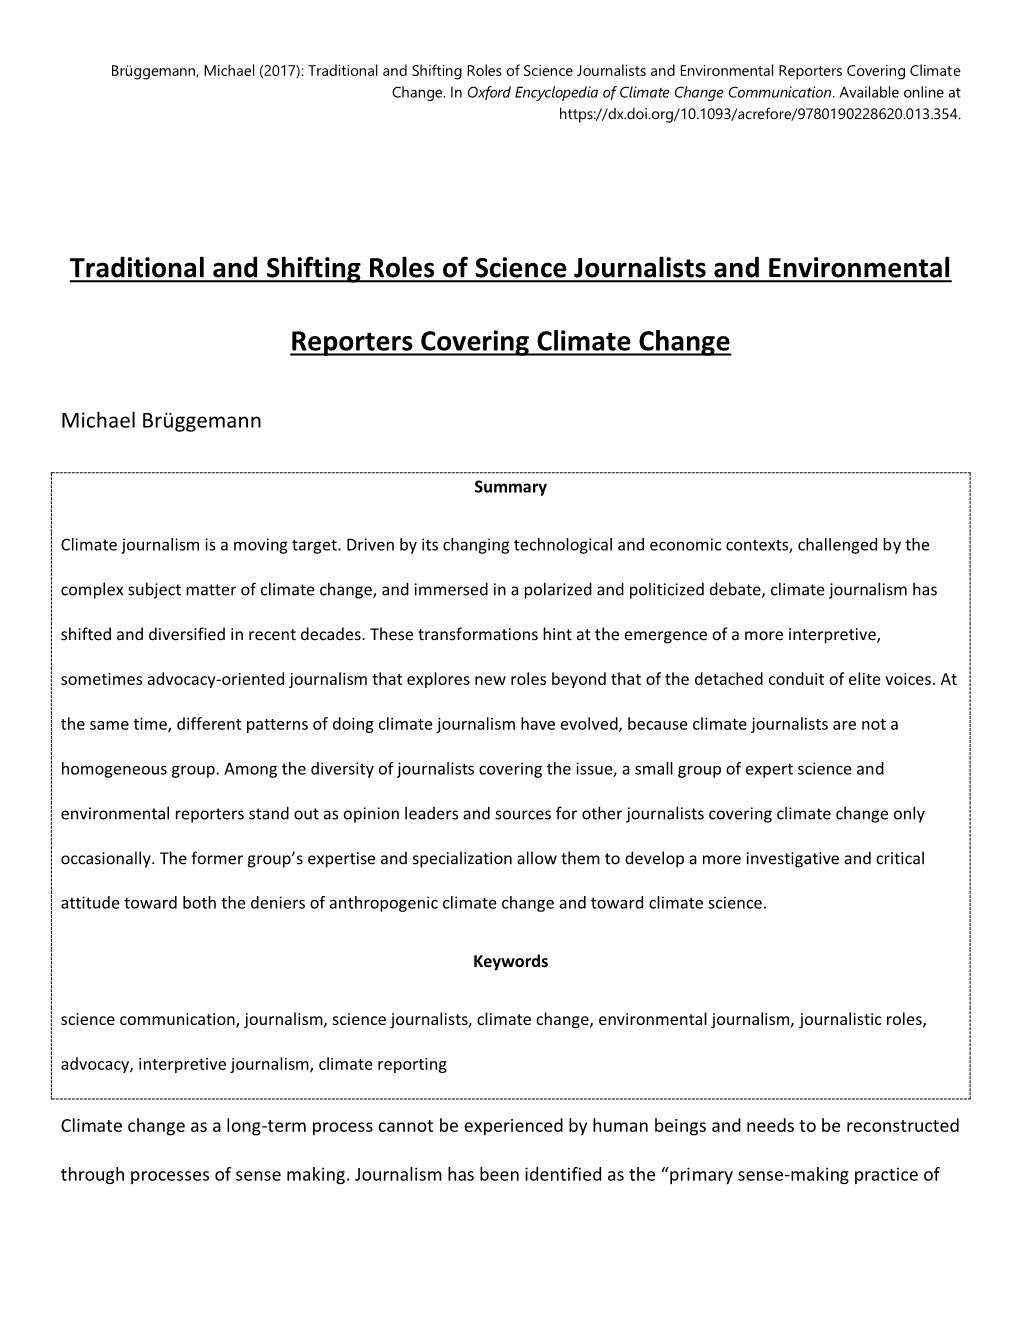 Traditional and Shifting Roles of Science Journalists and Environmental Reporters Covering Climate Change